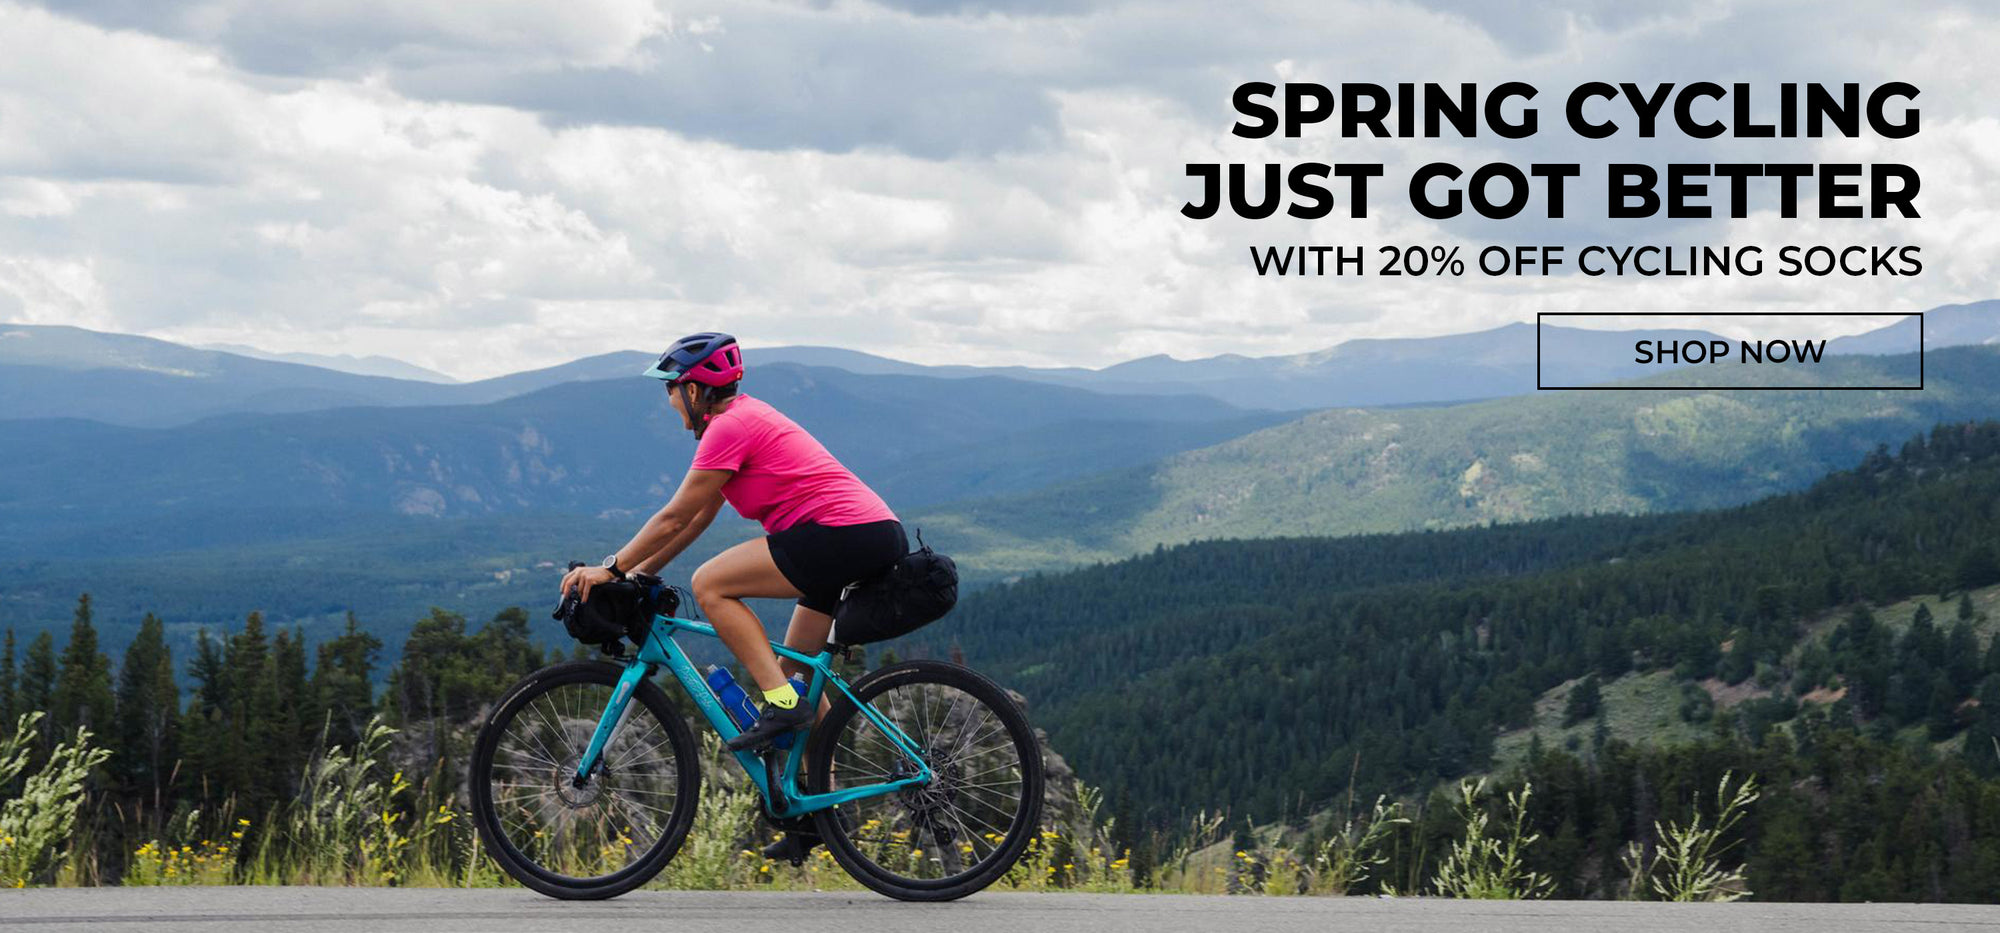 Spring cycling just got better with 20% off cycling socks. Shop now.